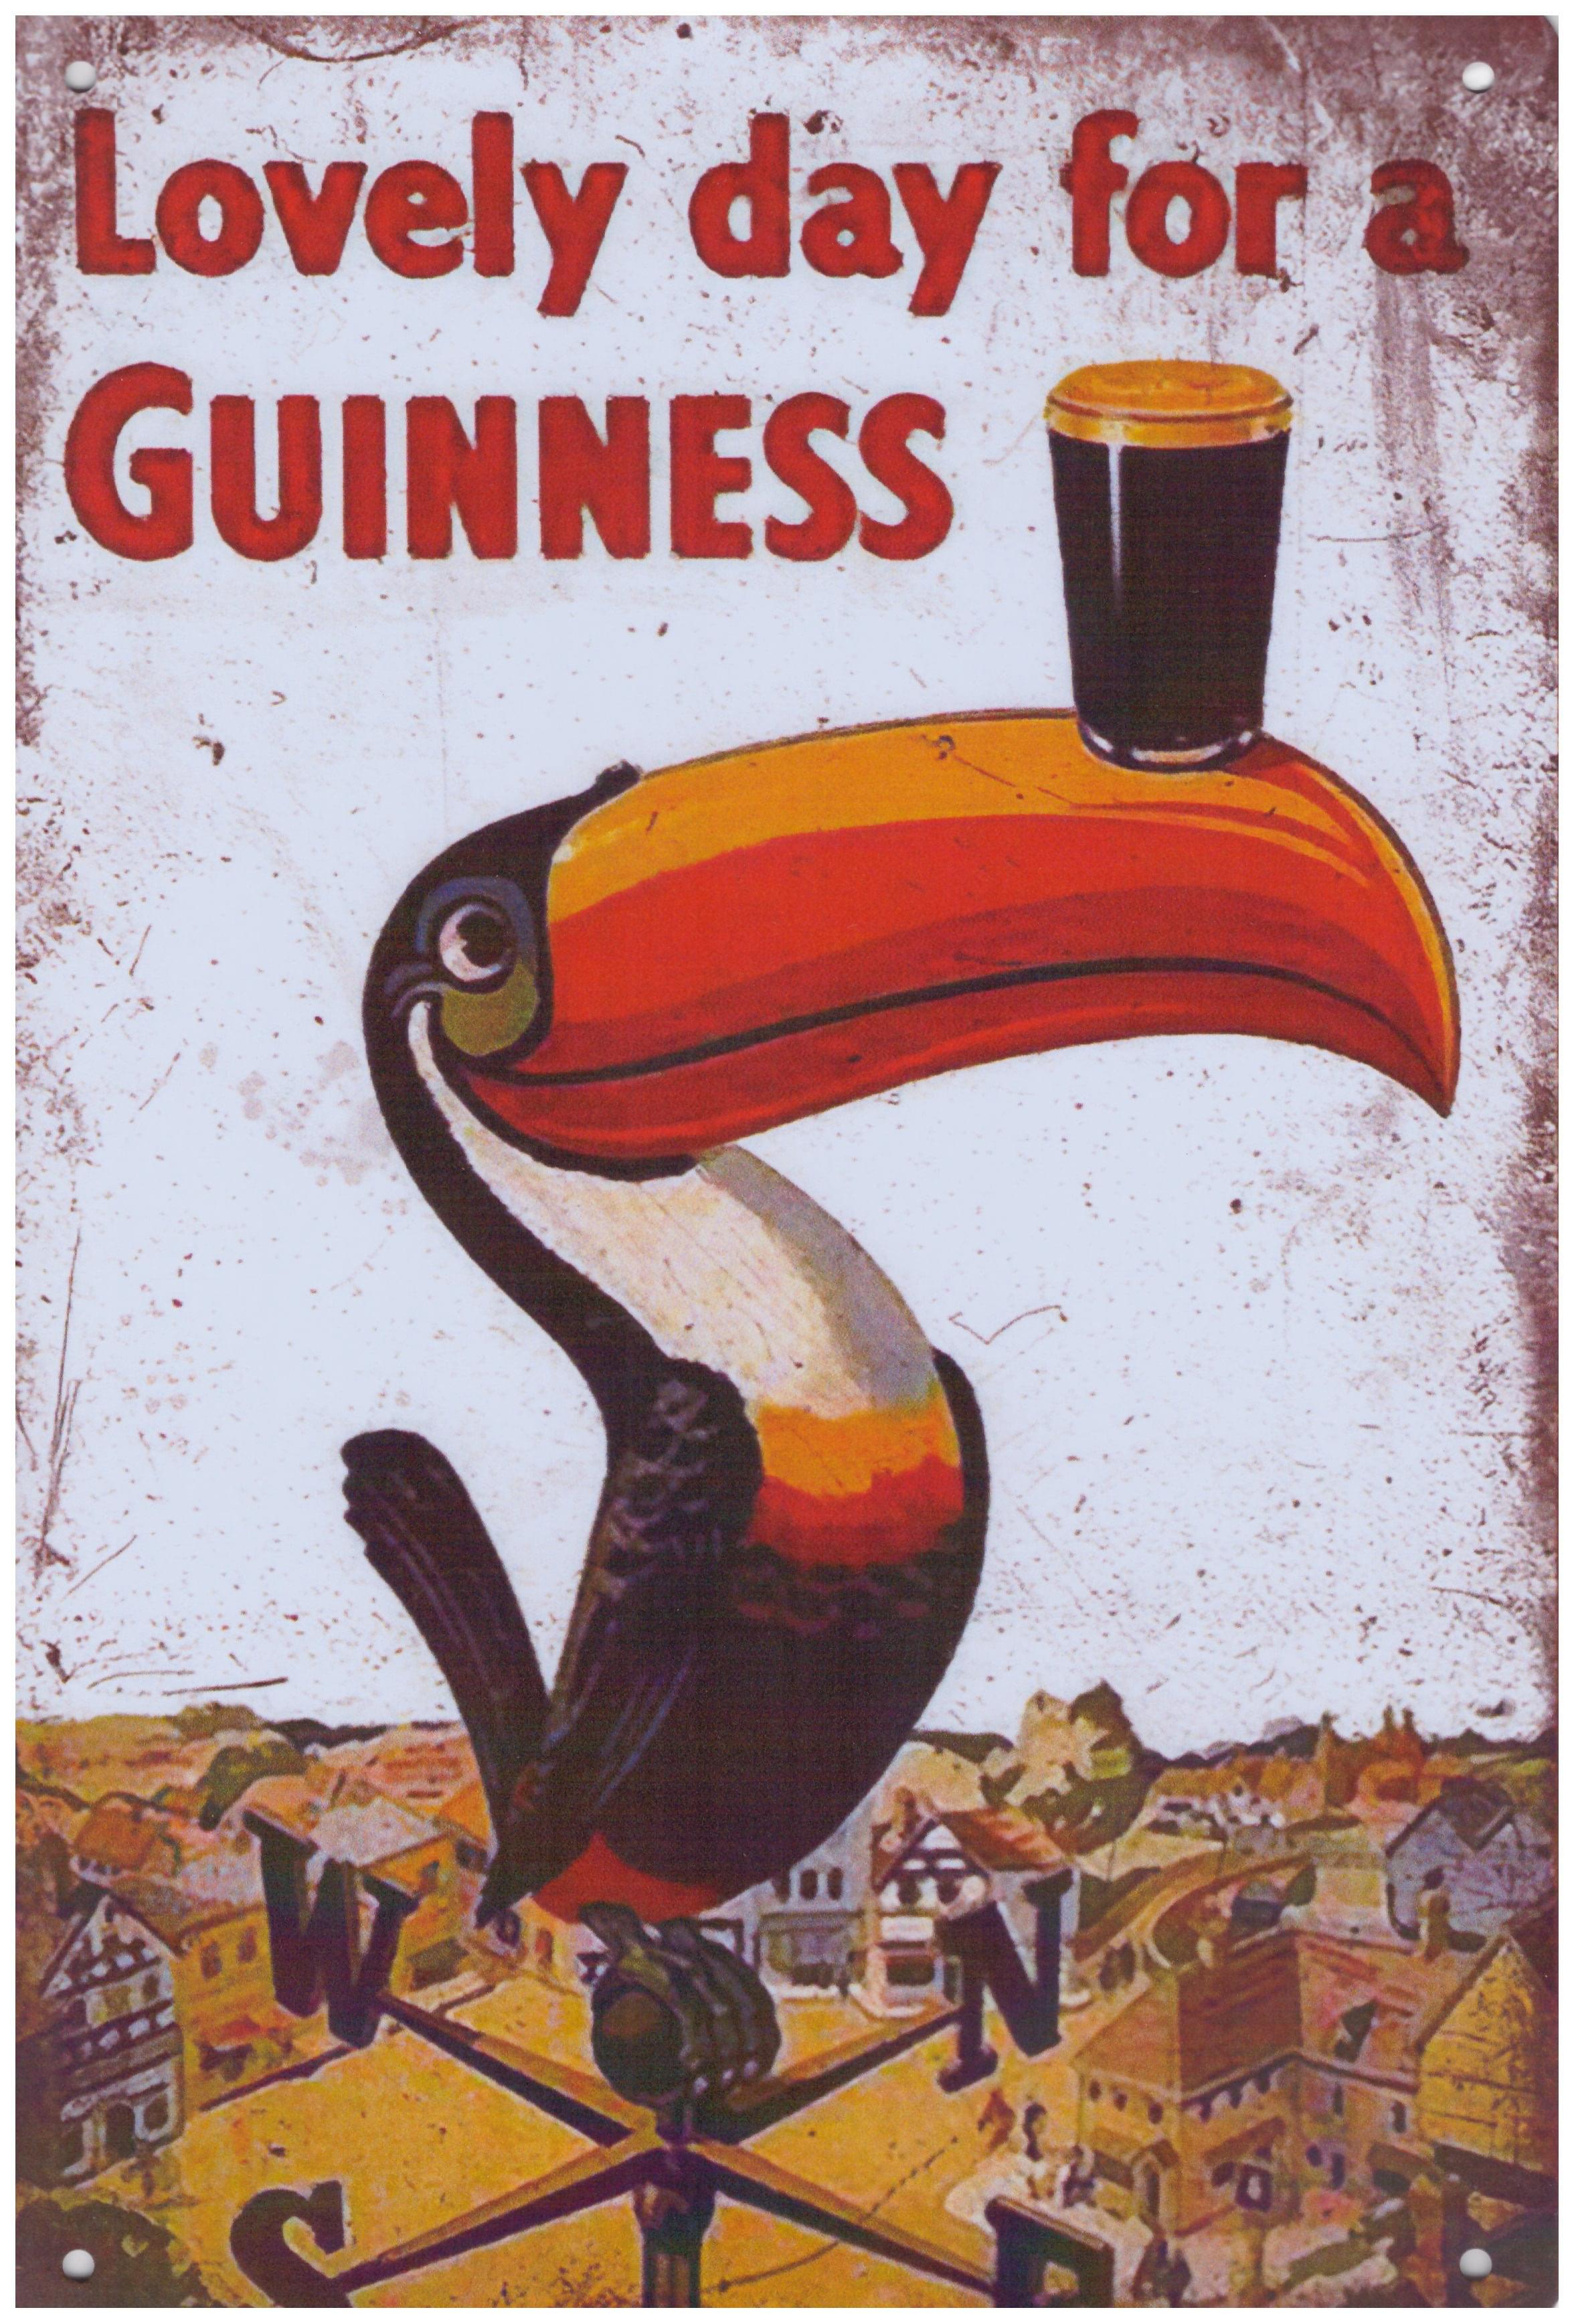 Lovely day for a Guinness - Old-Signs.co.uk